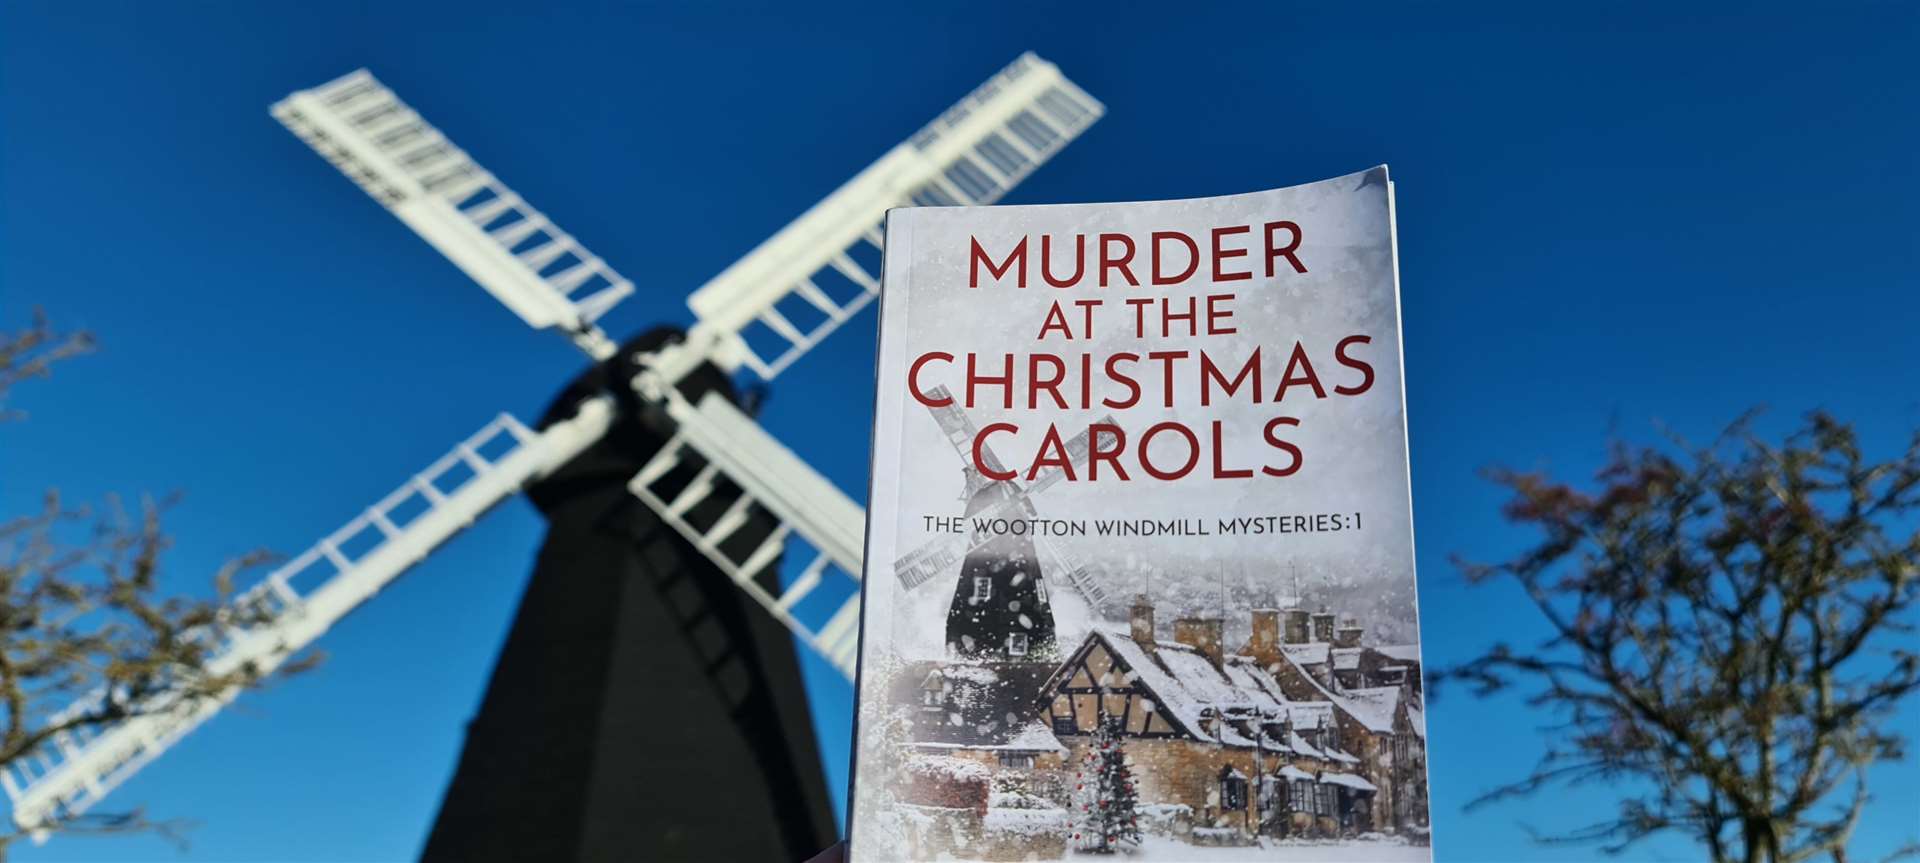 Murder at the Christmas Carols is a new book from Deal author Vicky Newham and is set in a fictional Kent village. Picture: Vicky Newham